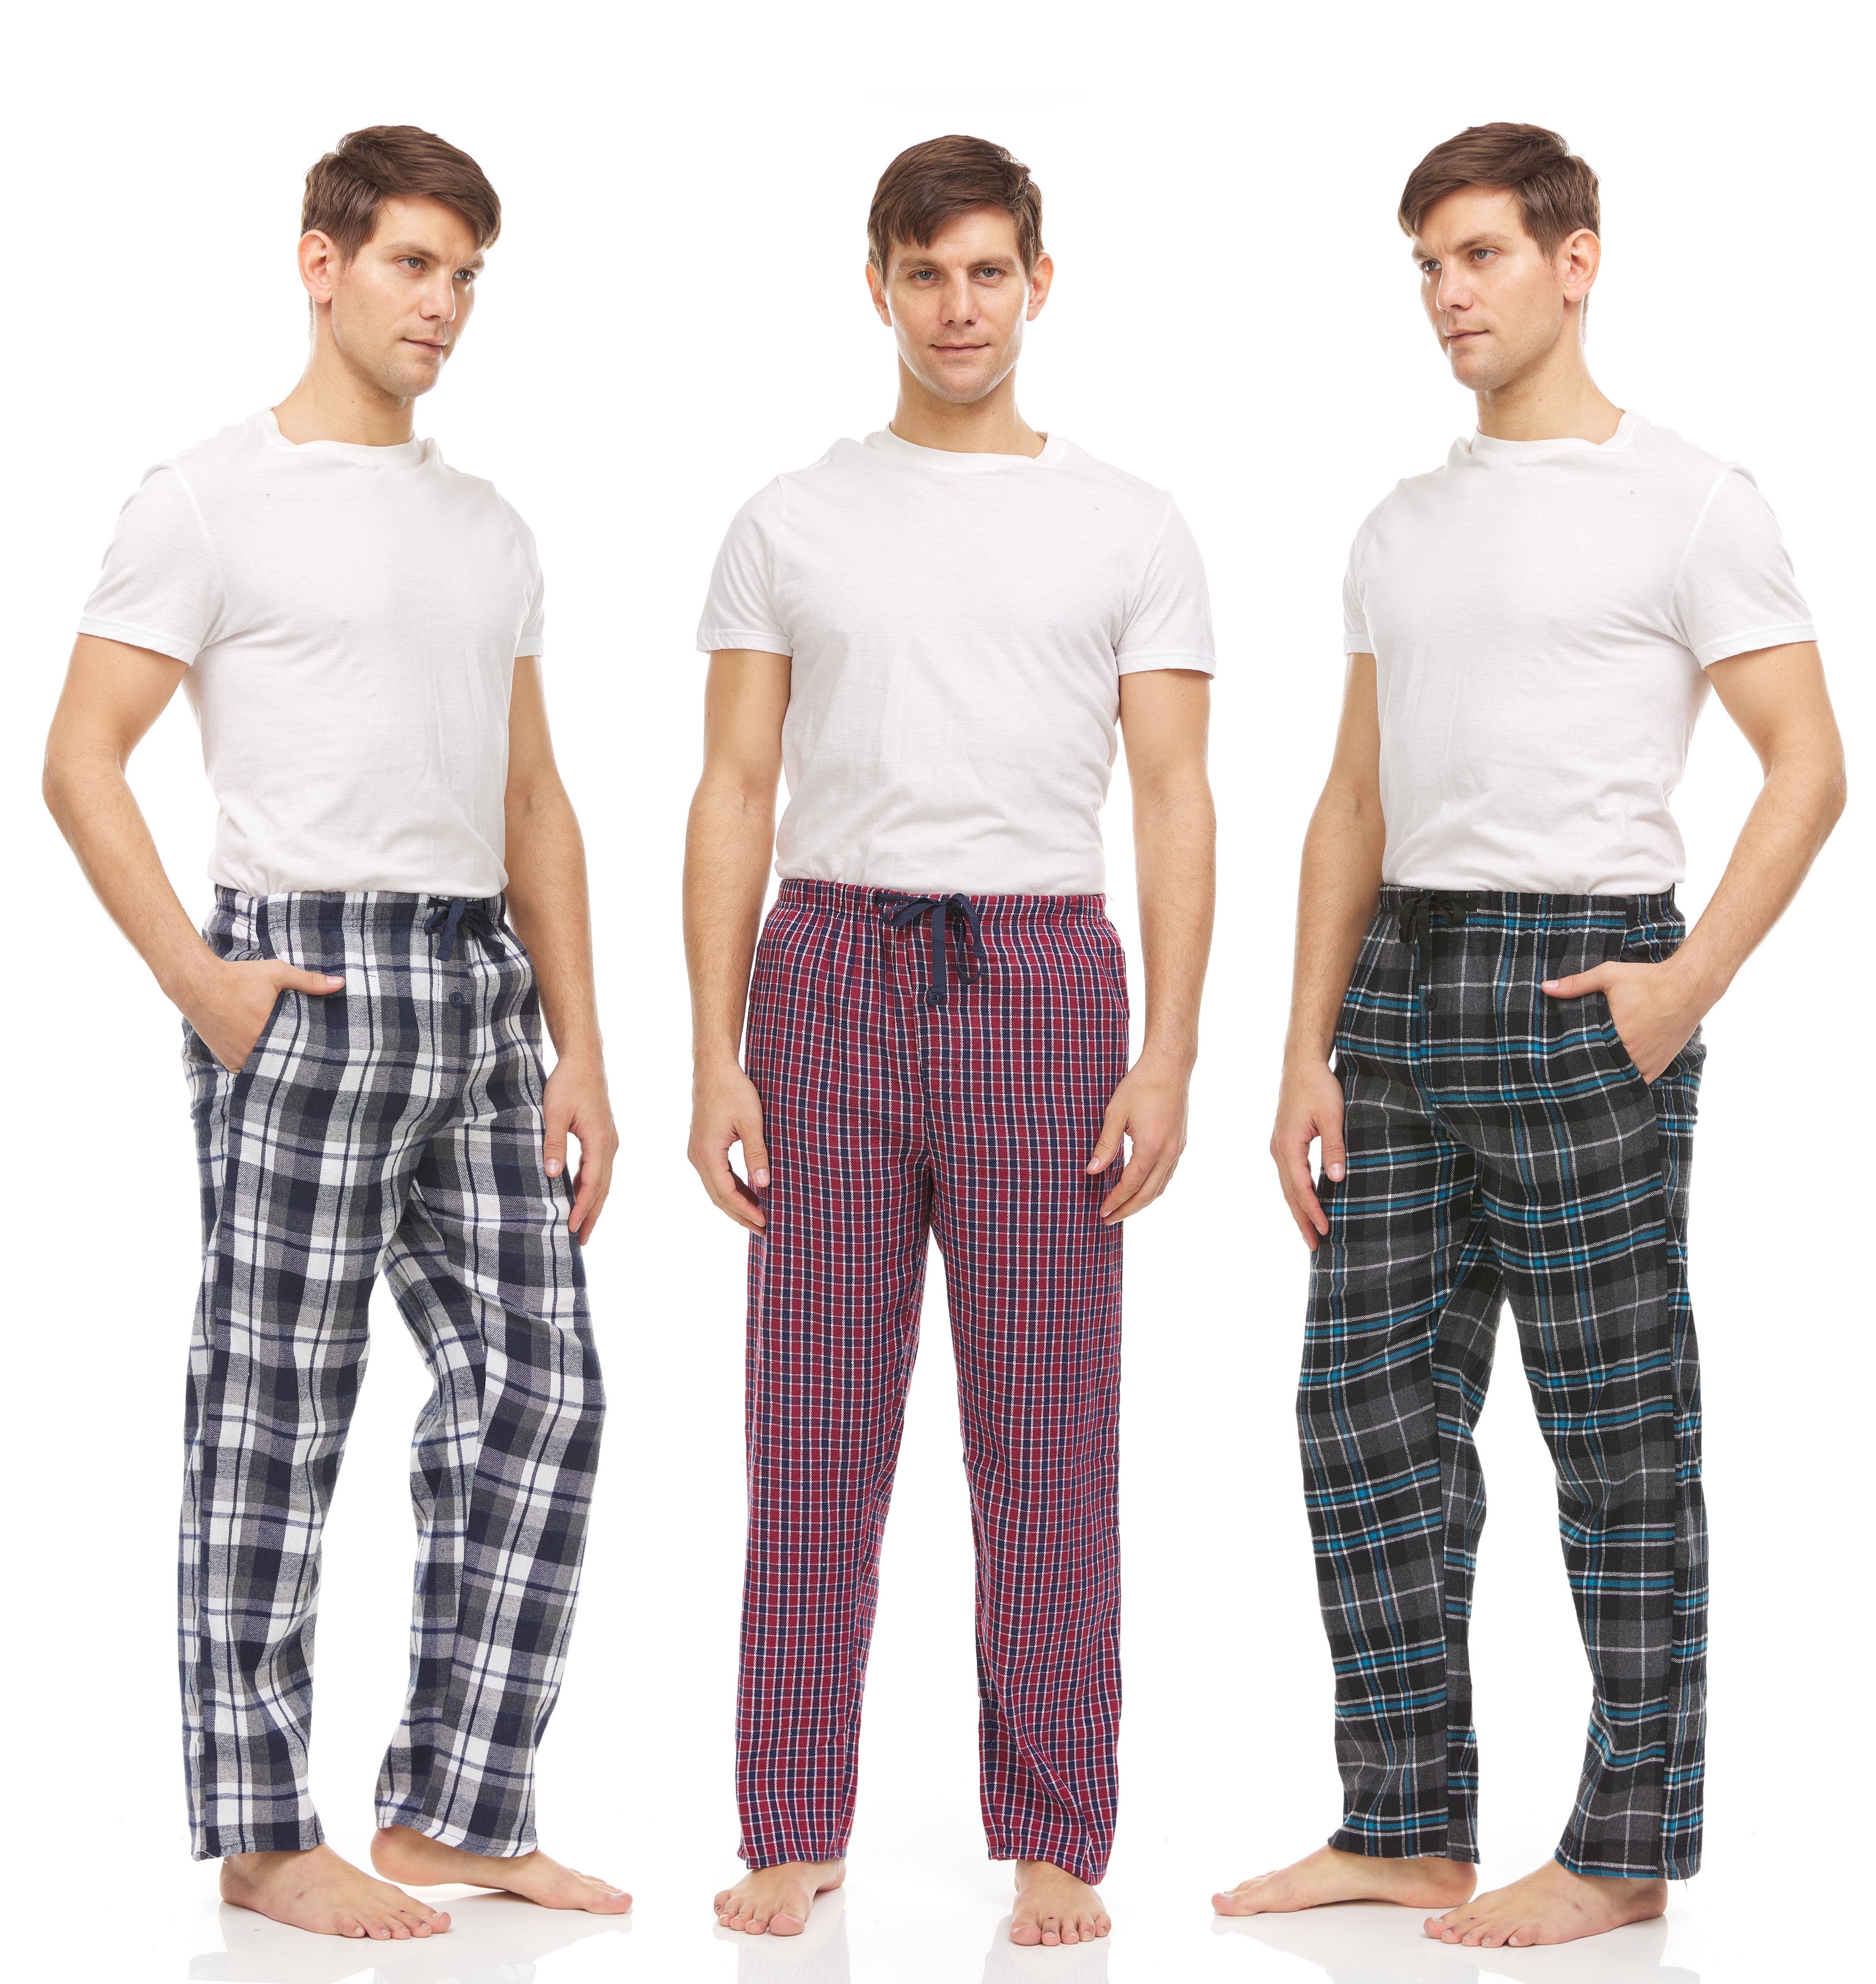 Men's Stylish Comfortable Fit Lower,Men Jogger,Men Pajama Night Pant,Track  Pants For Gym, Running, Athletic, Jogging Yoga Casual Wear